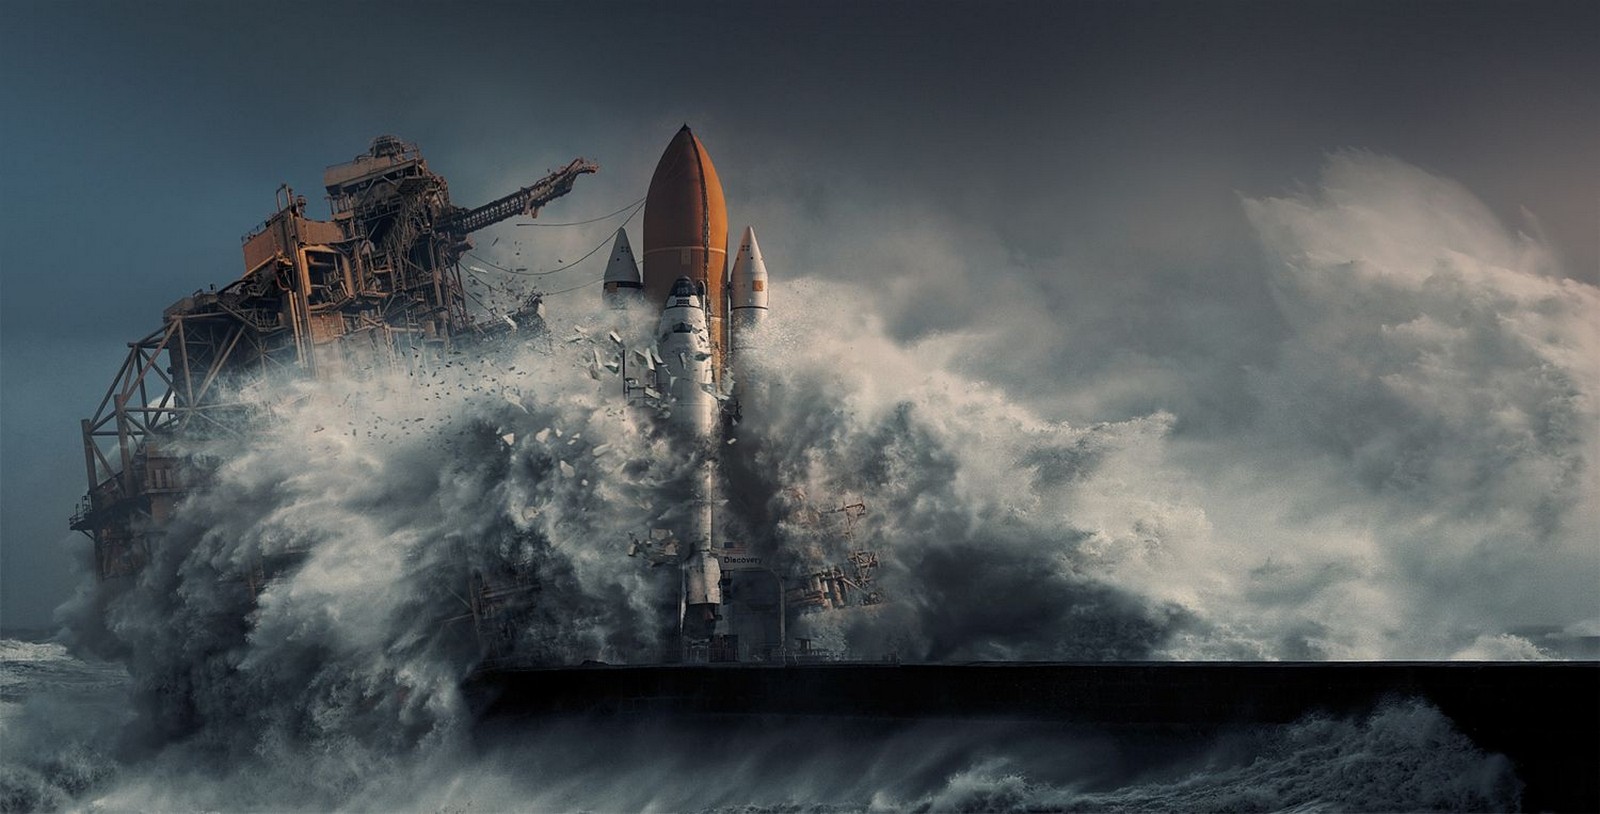 Nature Photography Landscape Apocalyptic Digital Art Sea Storm Cape Canaveral Space Shuttle Discover 1600x814